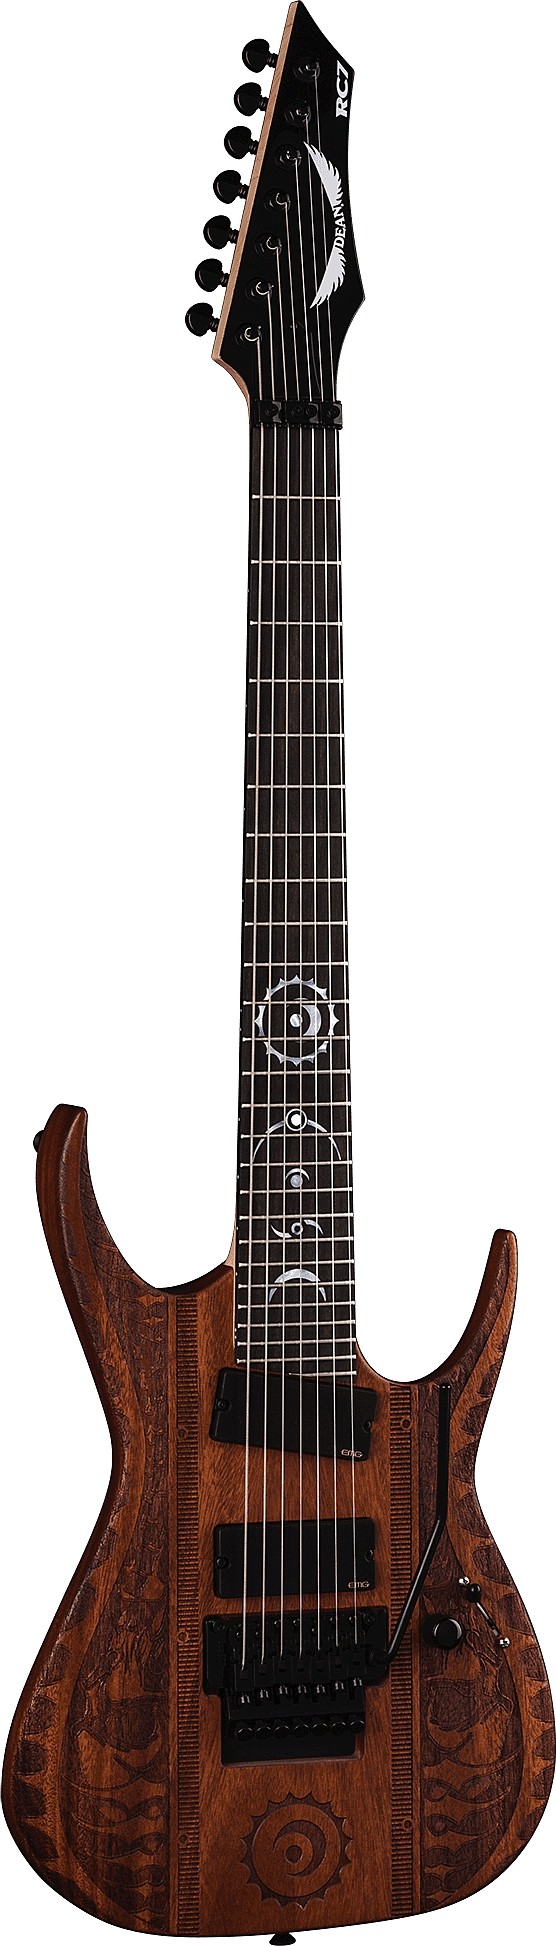 USA Rusty Cooley 7 String - Exoskeleton by Dean